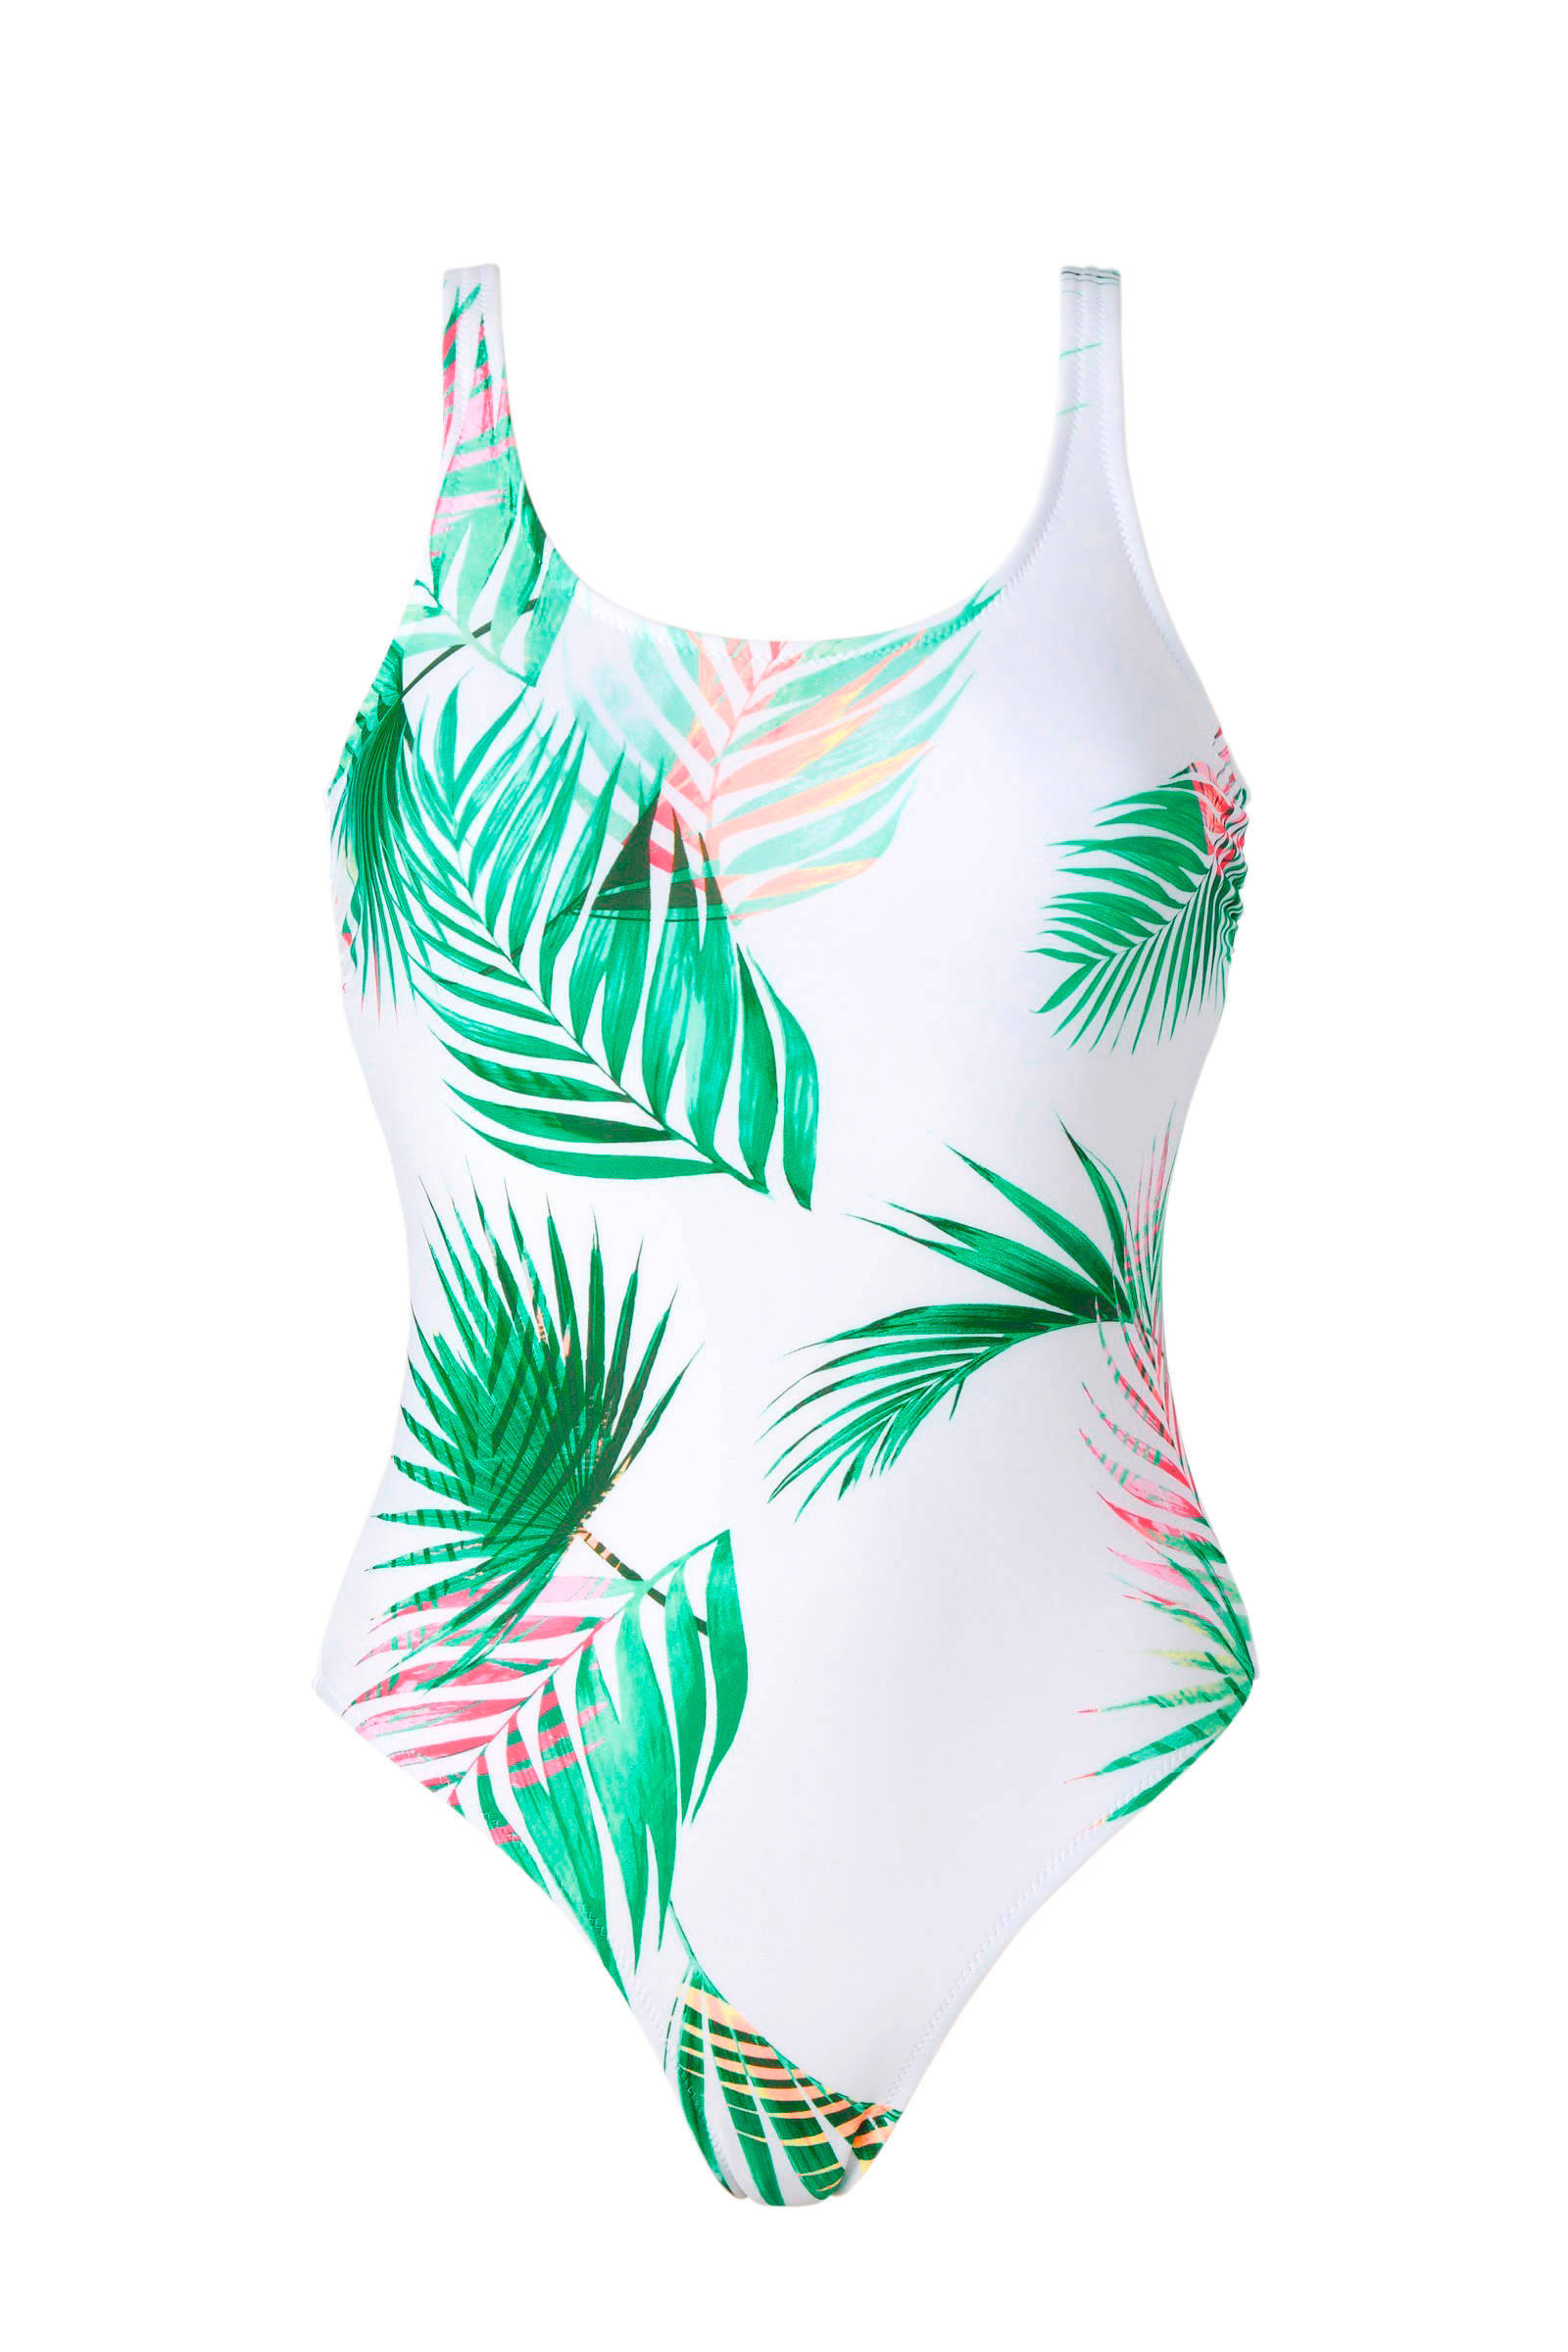 Find your perfect Swimwear here